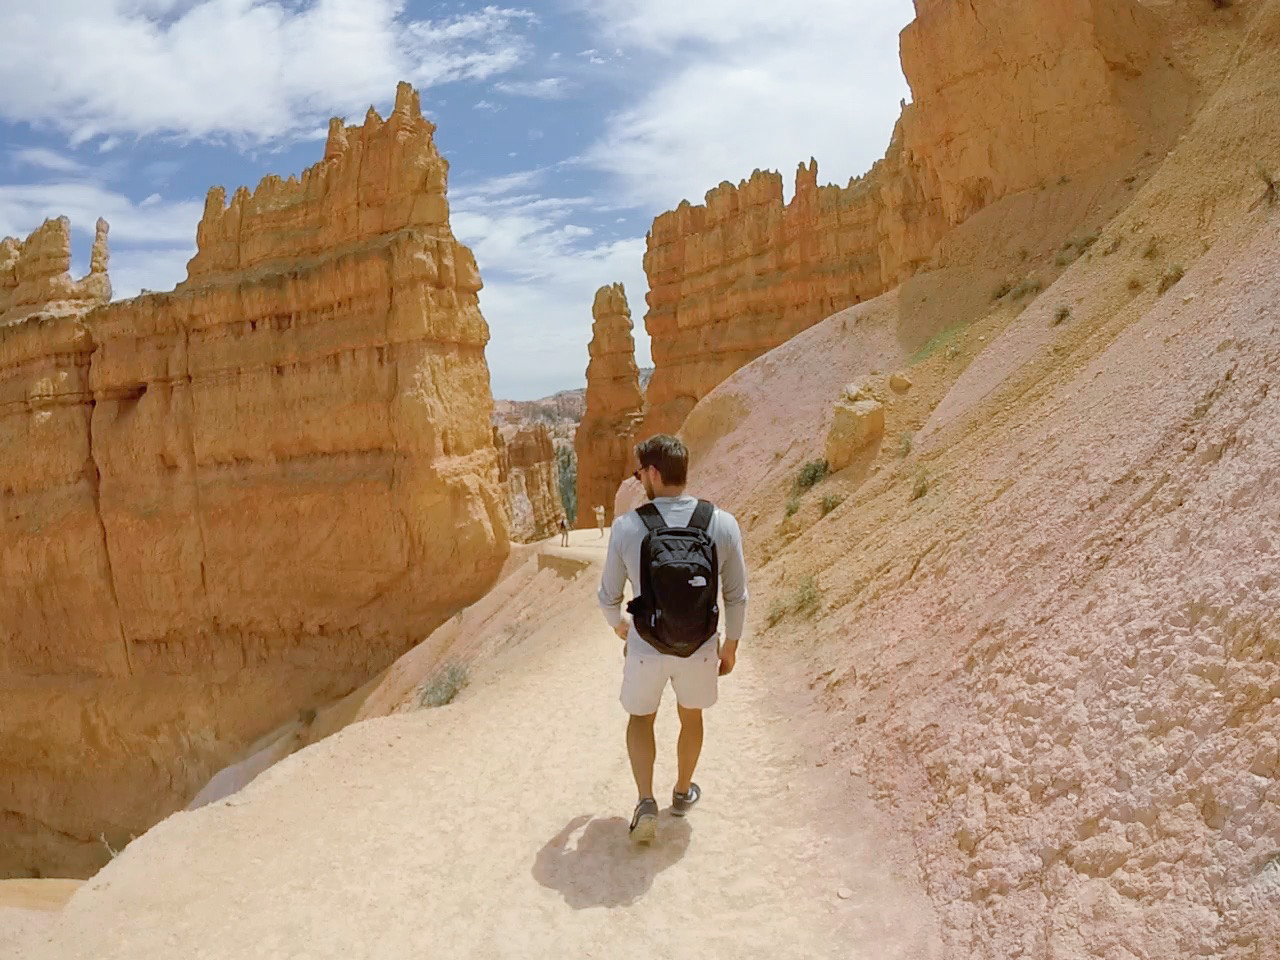 The hike through the hoodoos at Bryce Canyon in Utah.